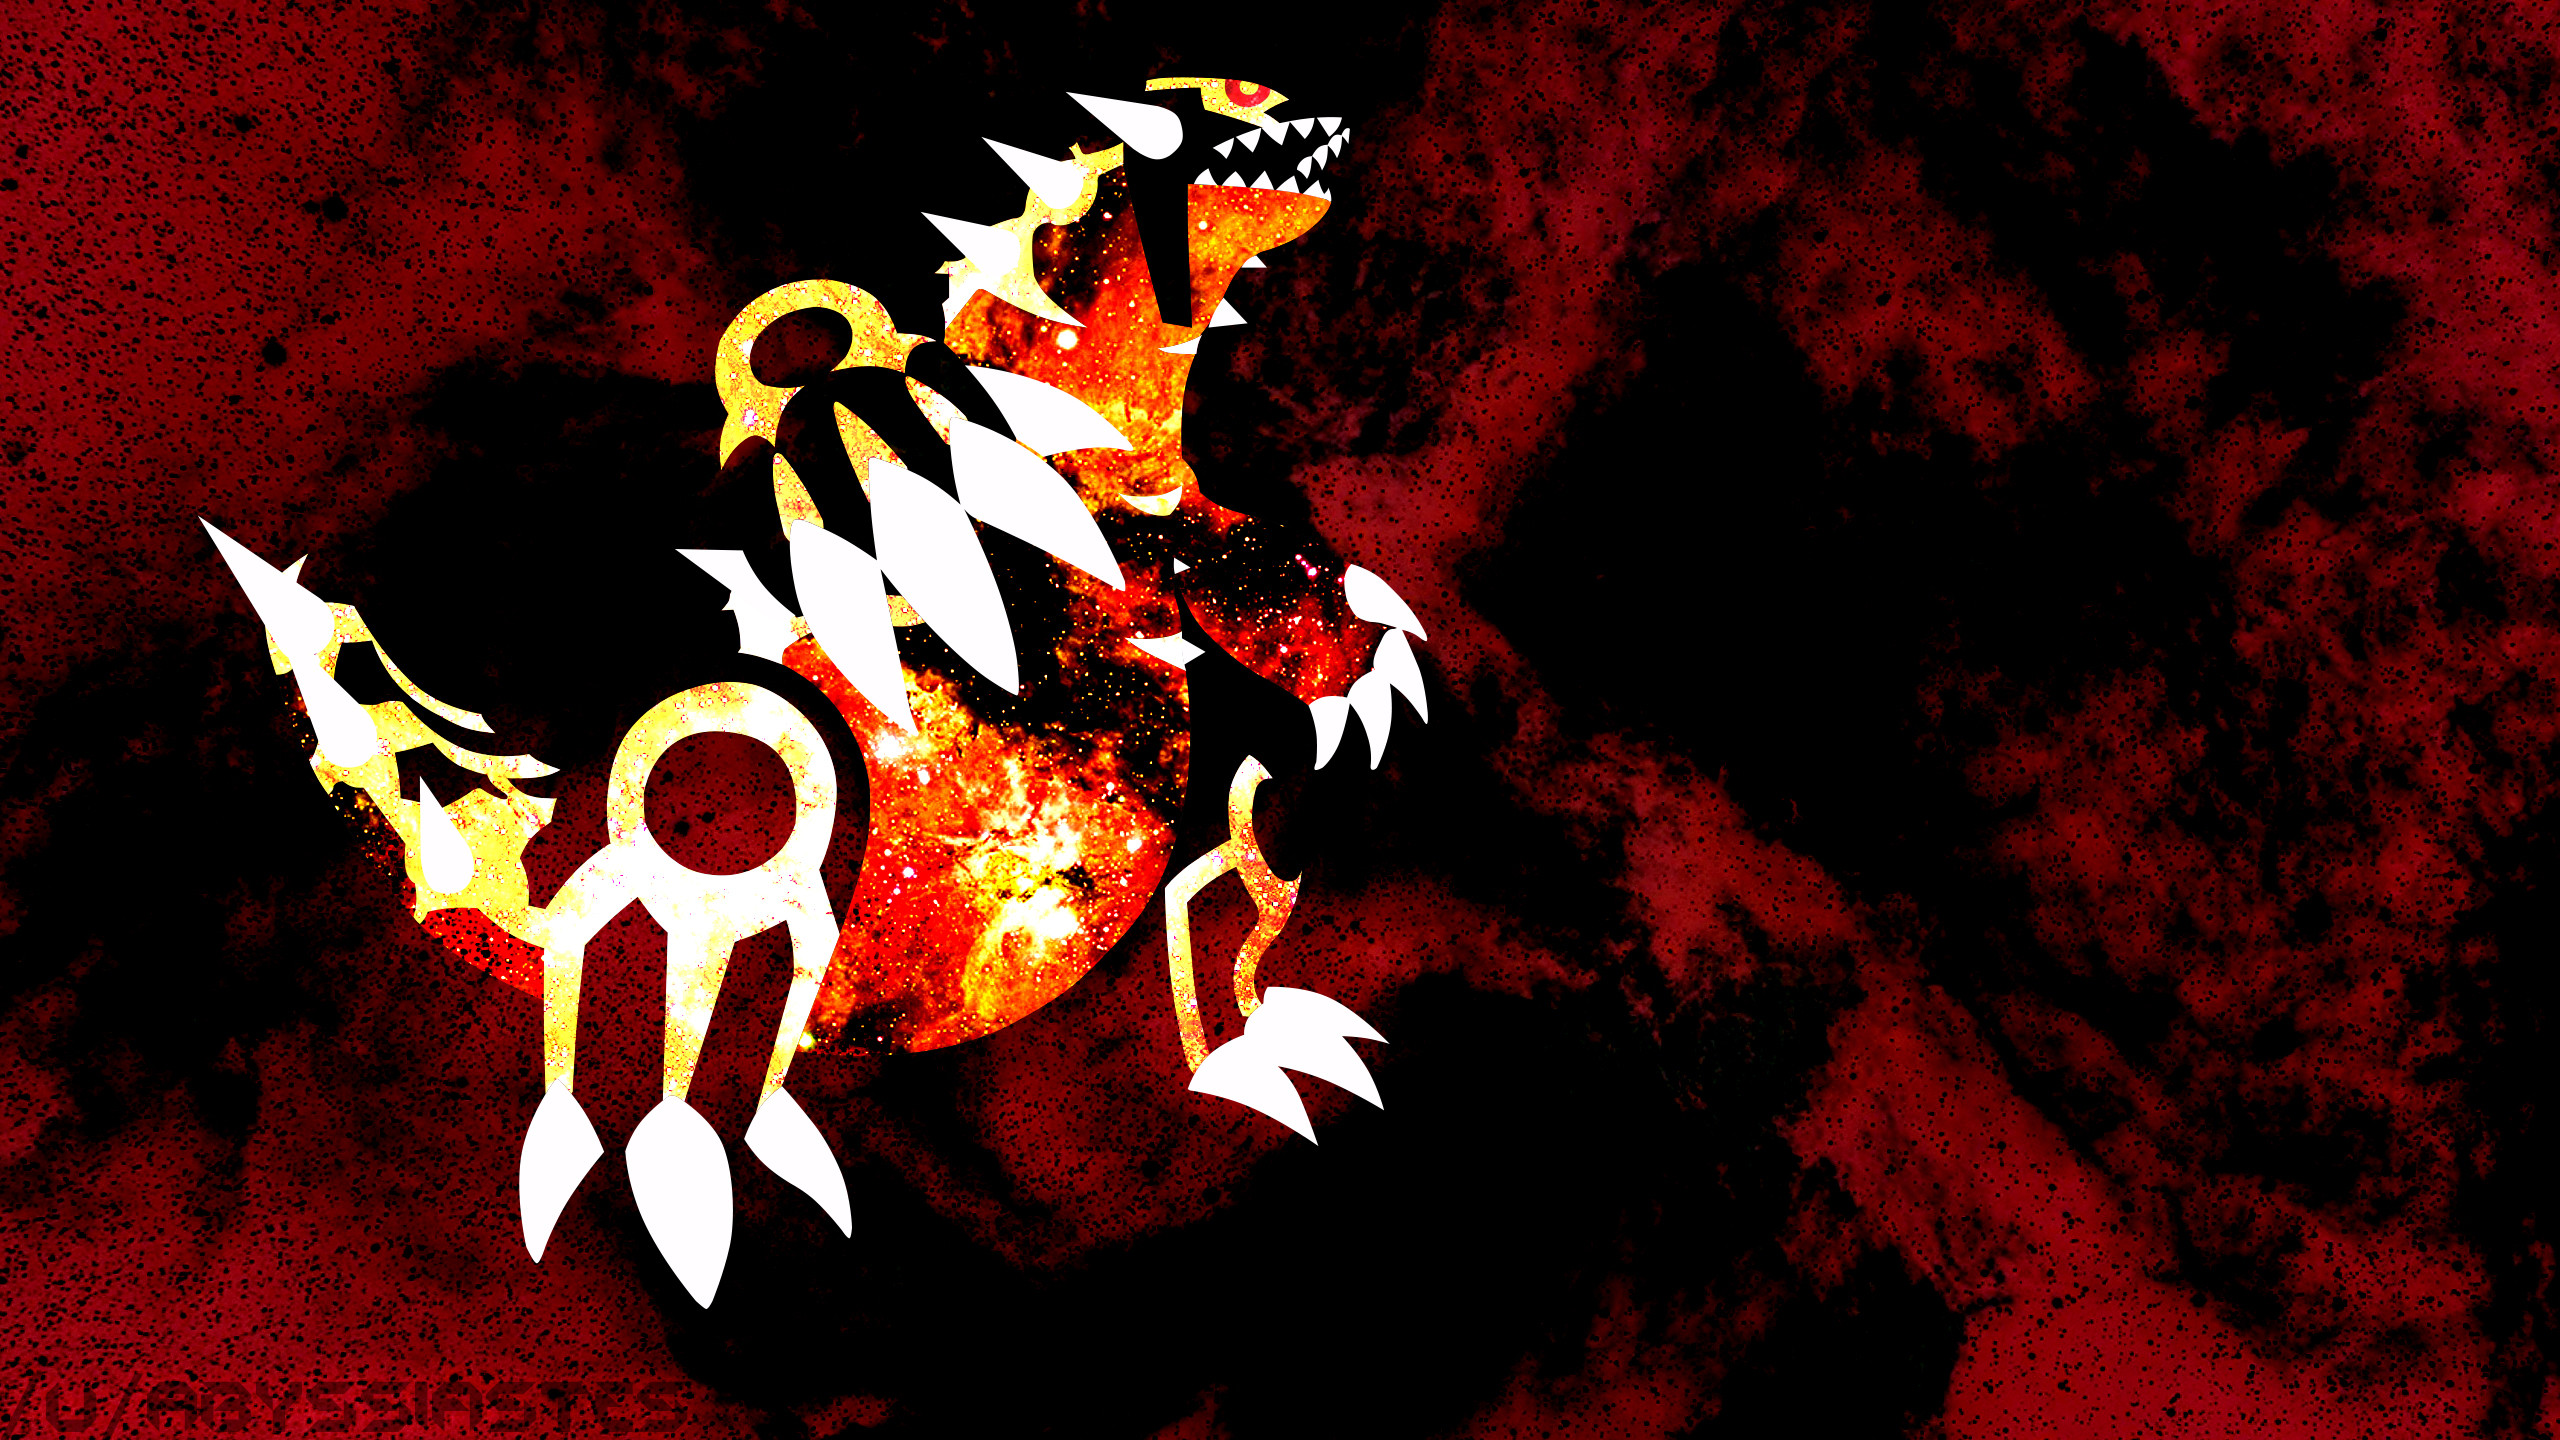 Primal Groudon Wallpaper The Background Pictures Have